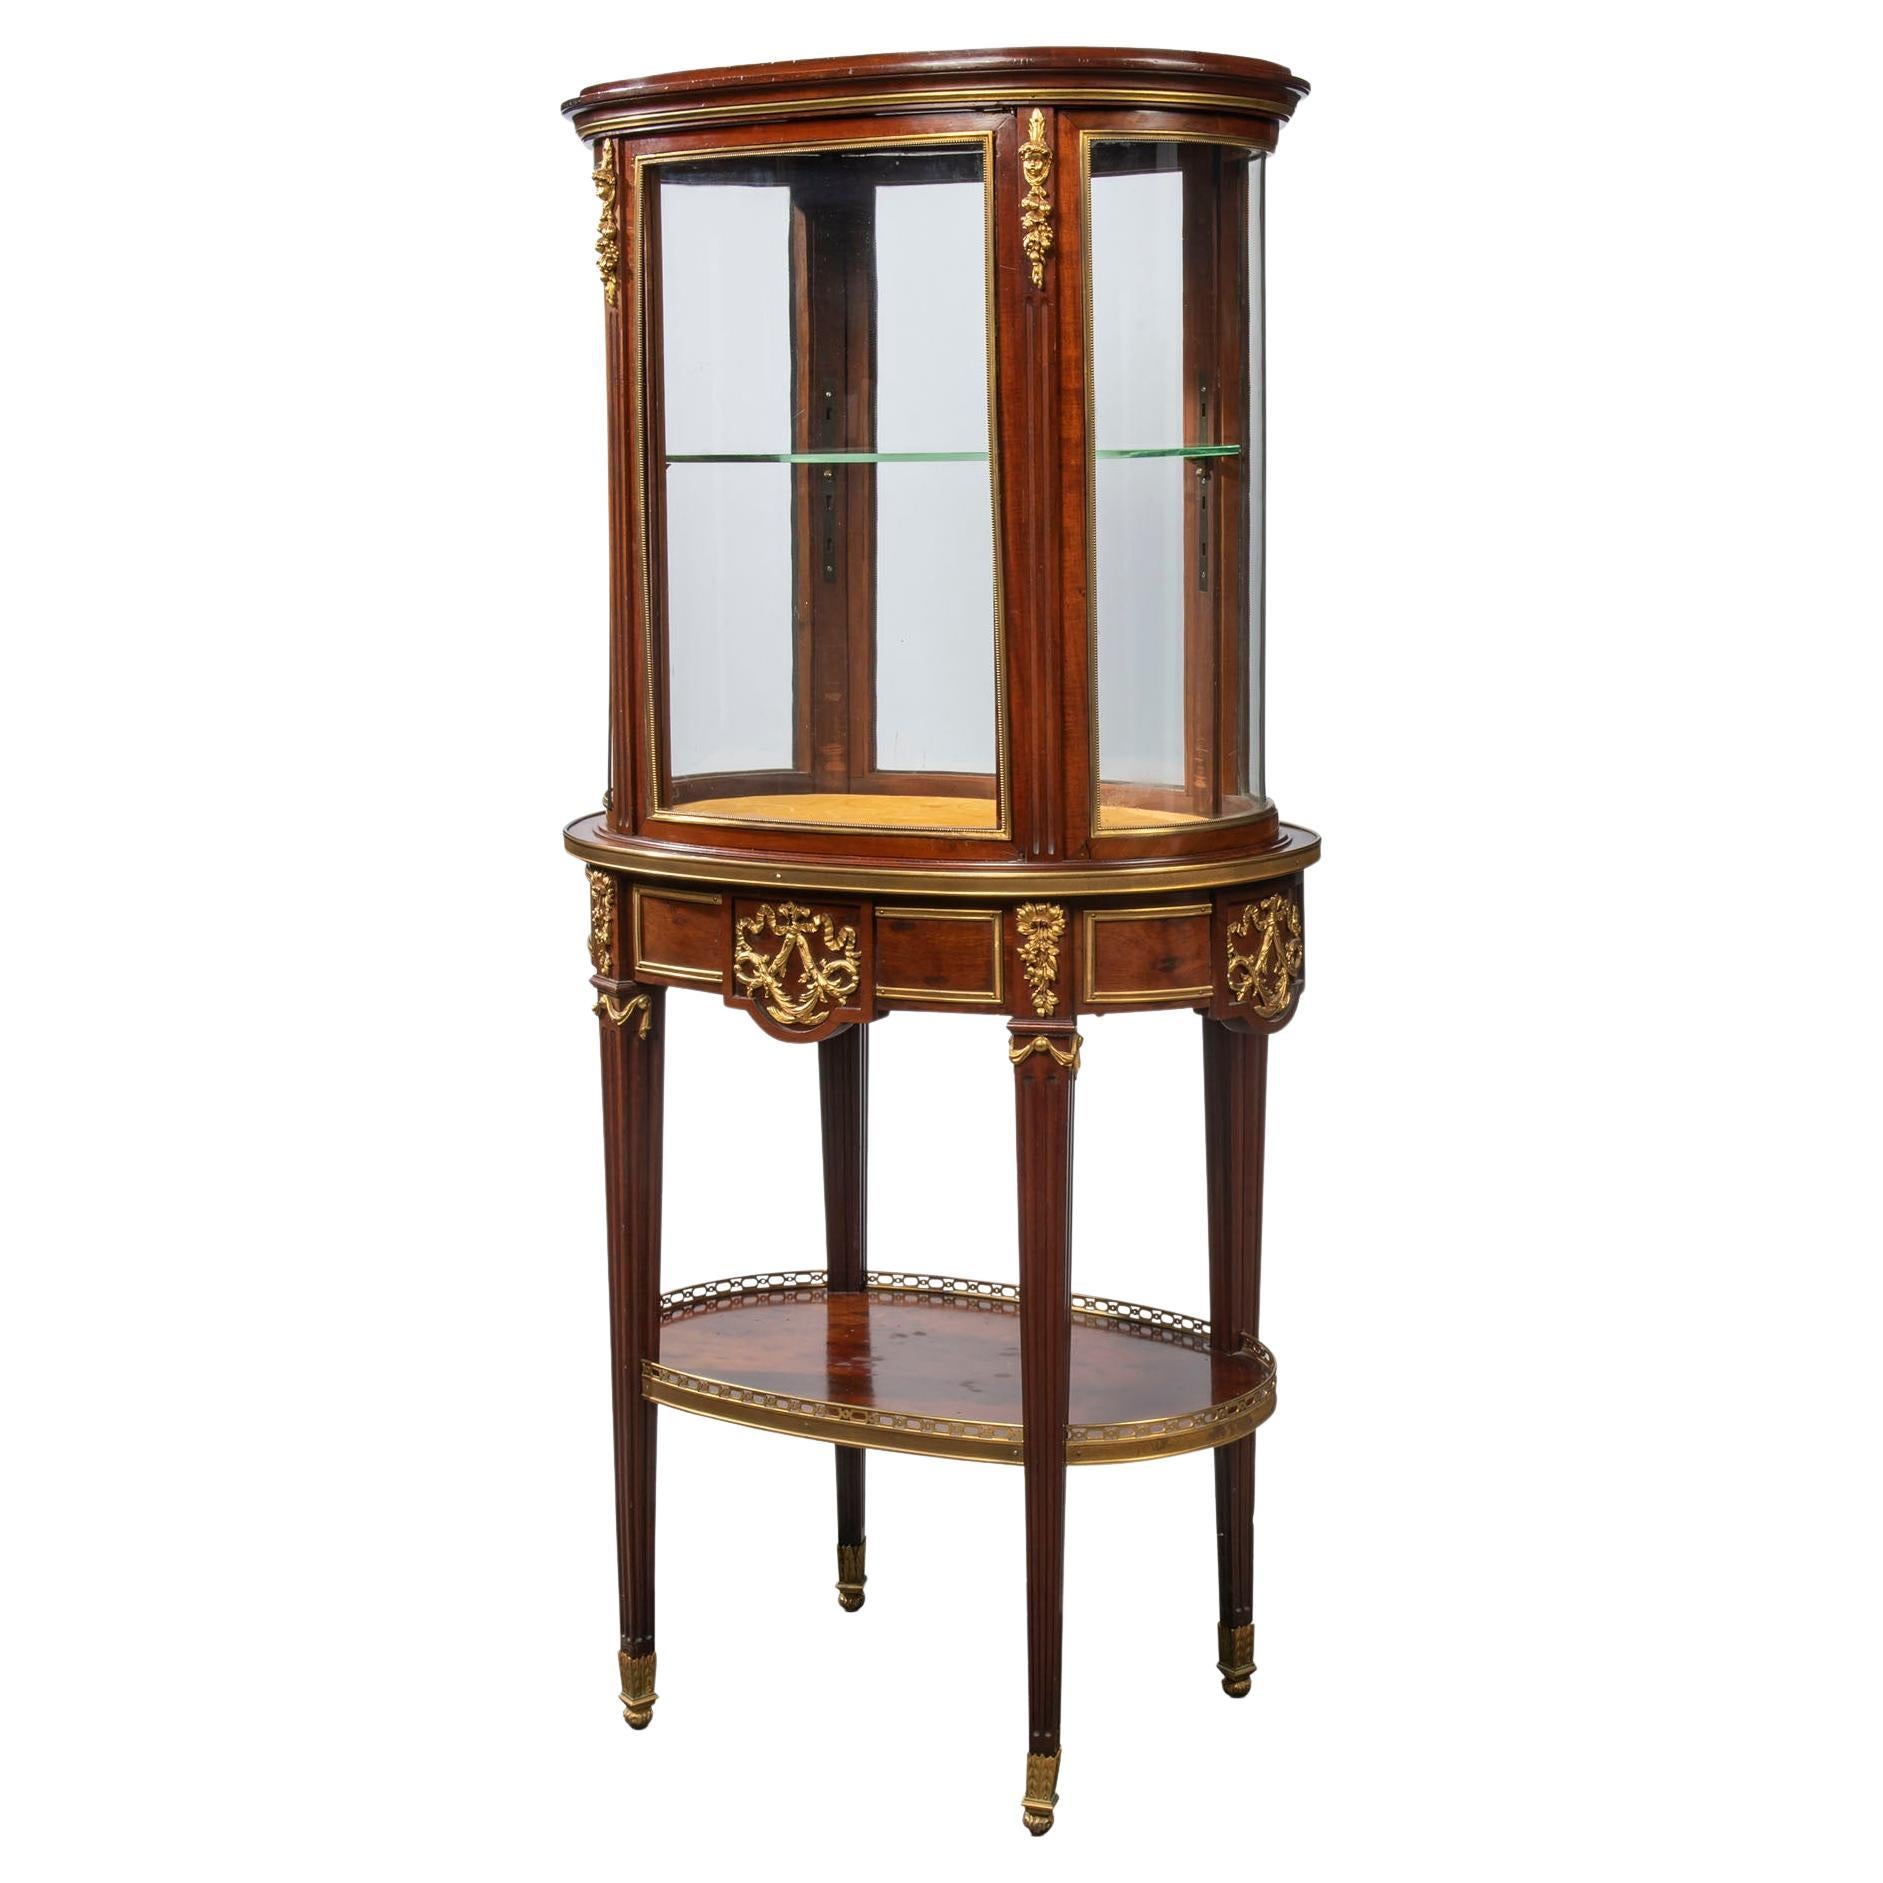 A Fine Louis XVI Style Centre Display Cabinet by Paul Sormani For Sale